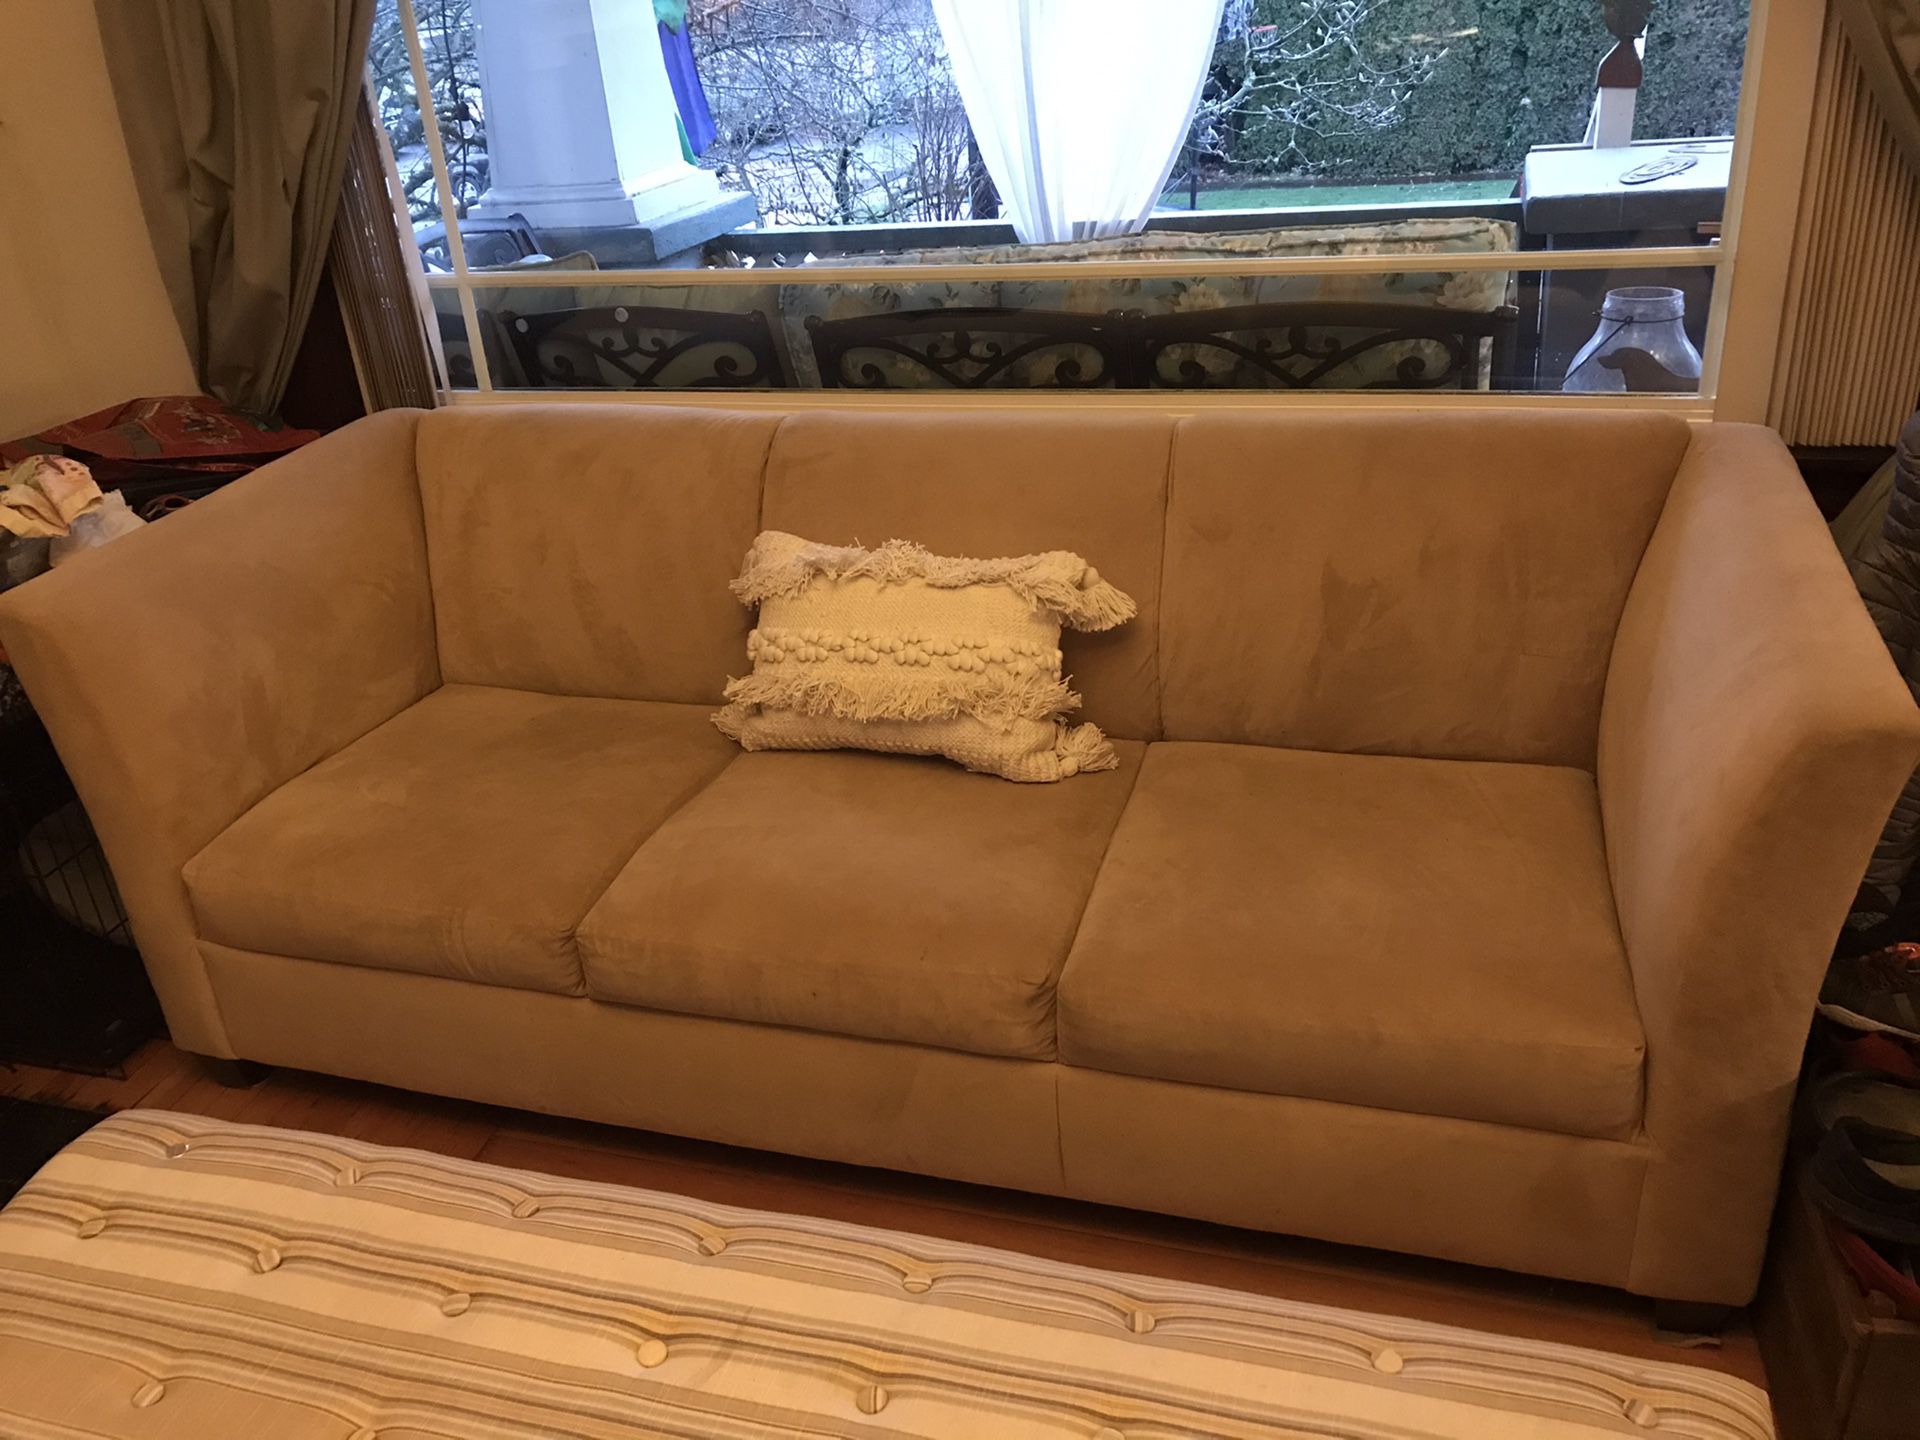 Tan sofa - in great condition